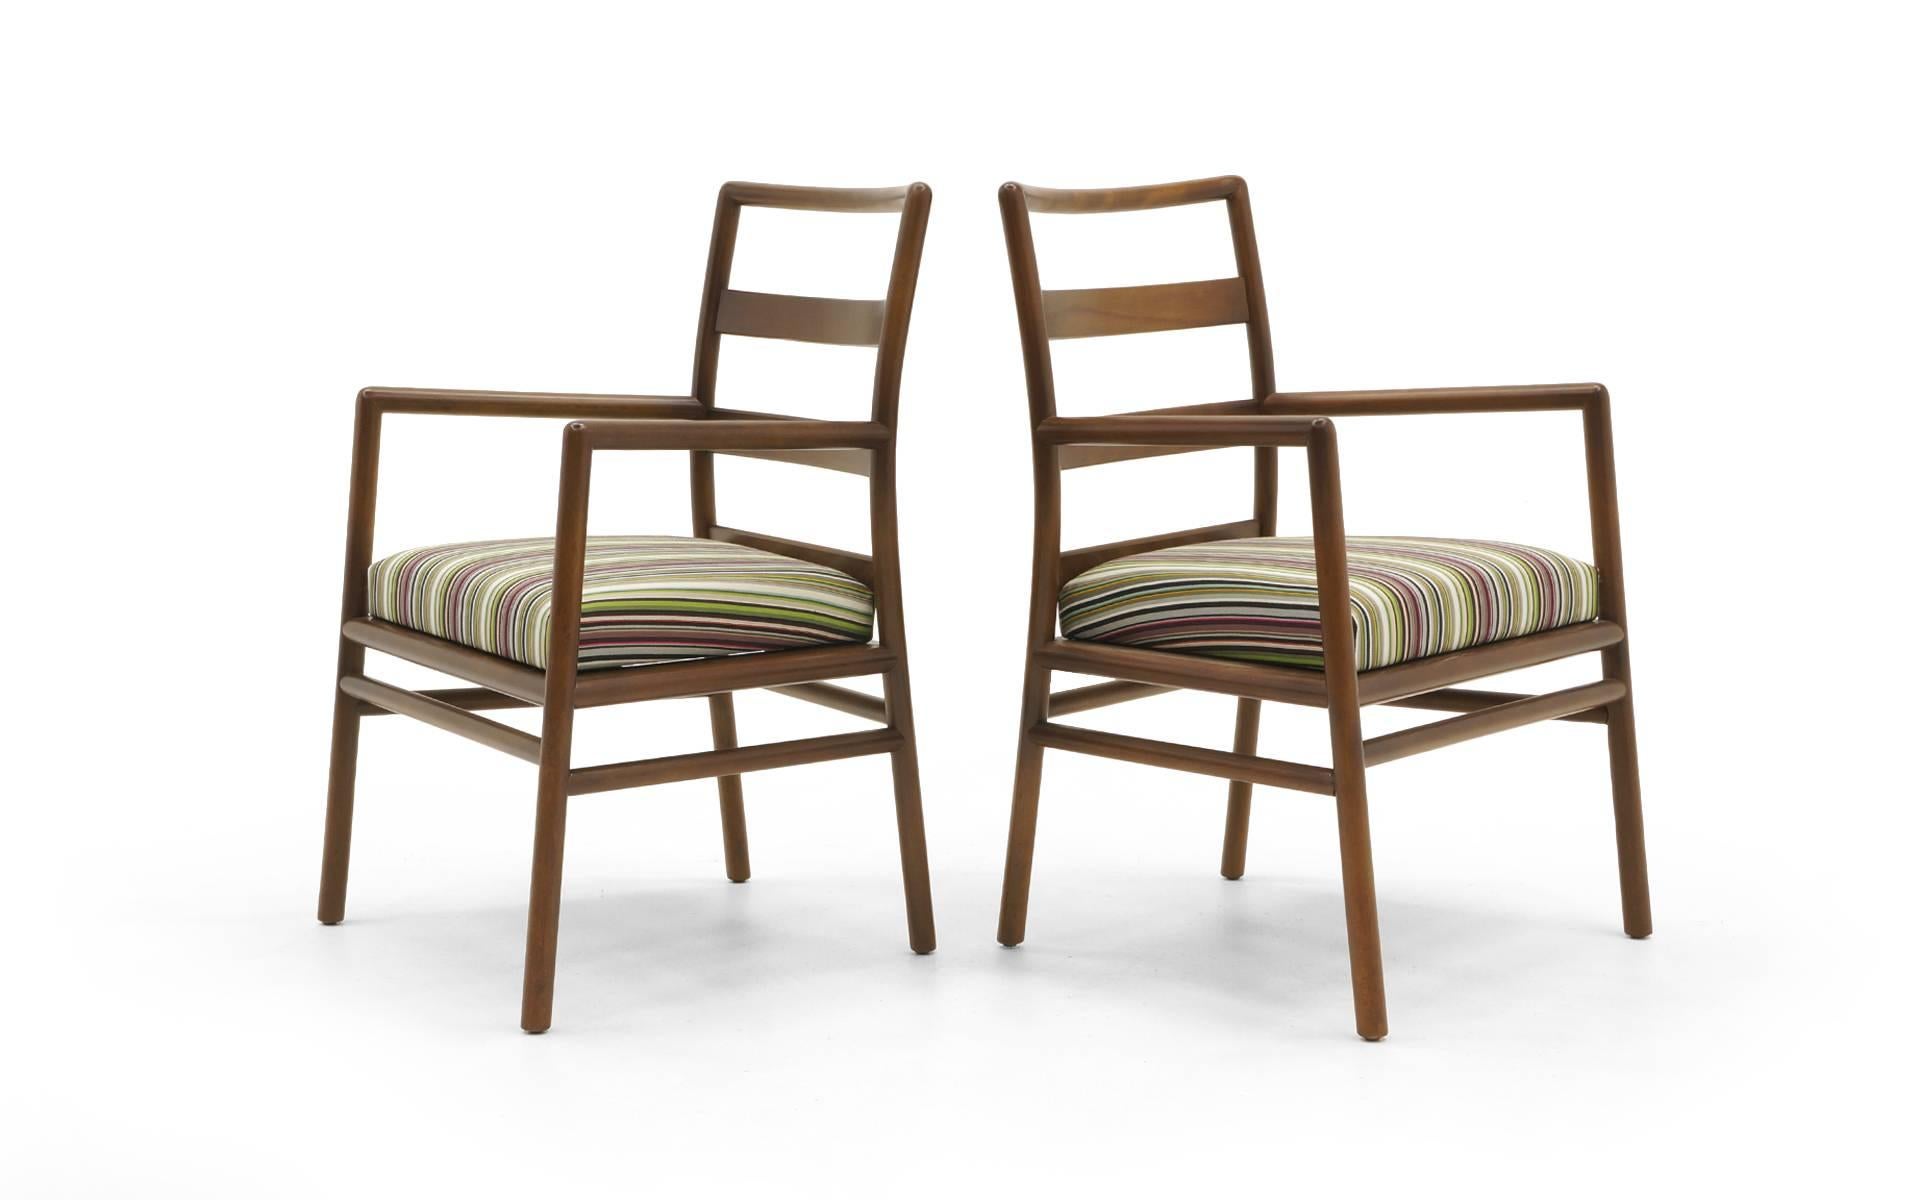 Set of twelve dining chairs designed by T.H. Robsjohn-Gibbings for Widdicomb. Two arm chairs and ten side chairs. All expertly refinished and reupholstered in Paul Smith Stripe Fabric for Maharam. These are super sturdy, relatively wide dining